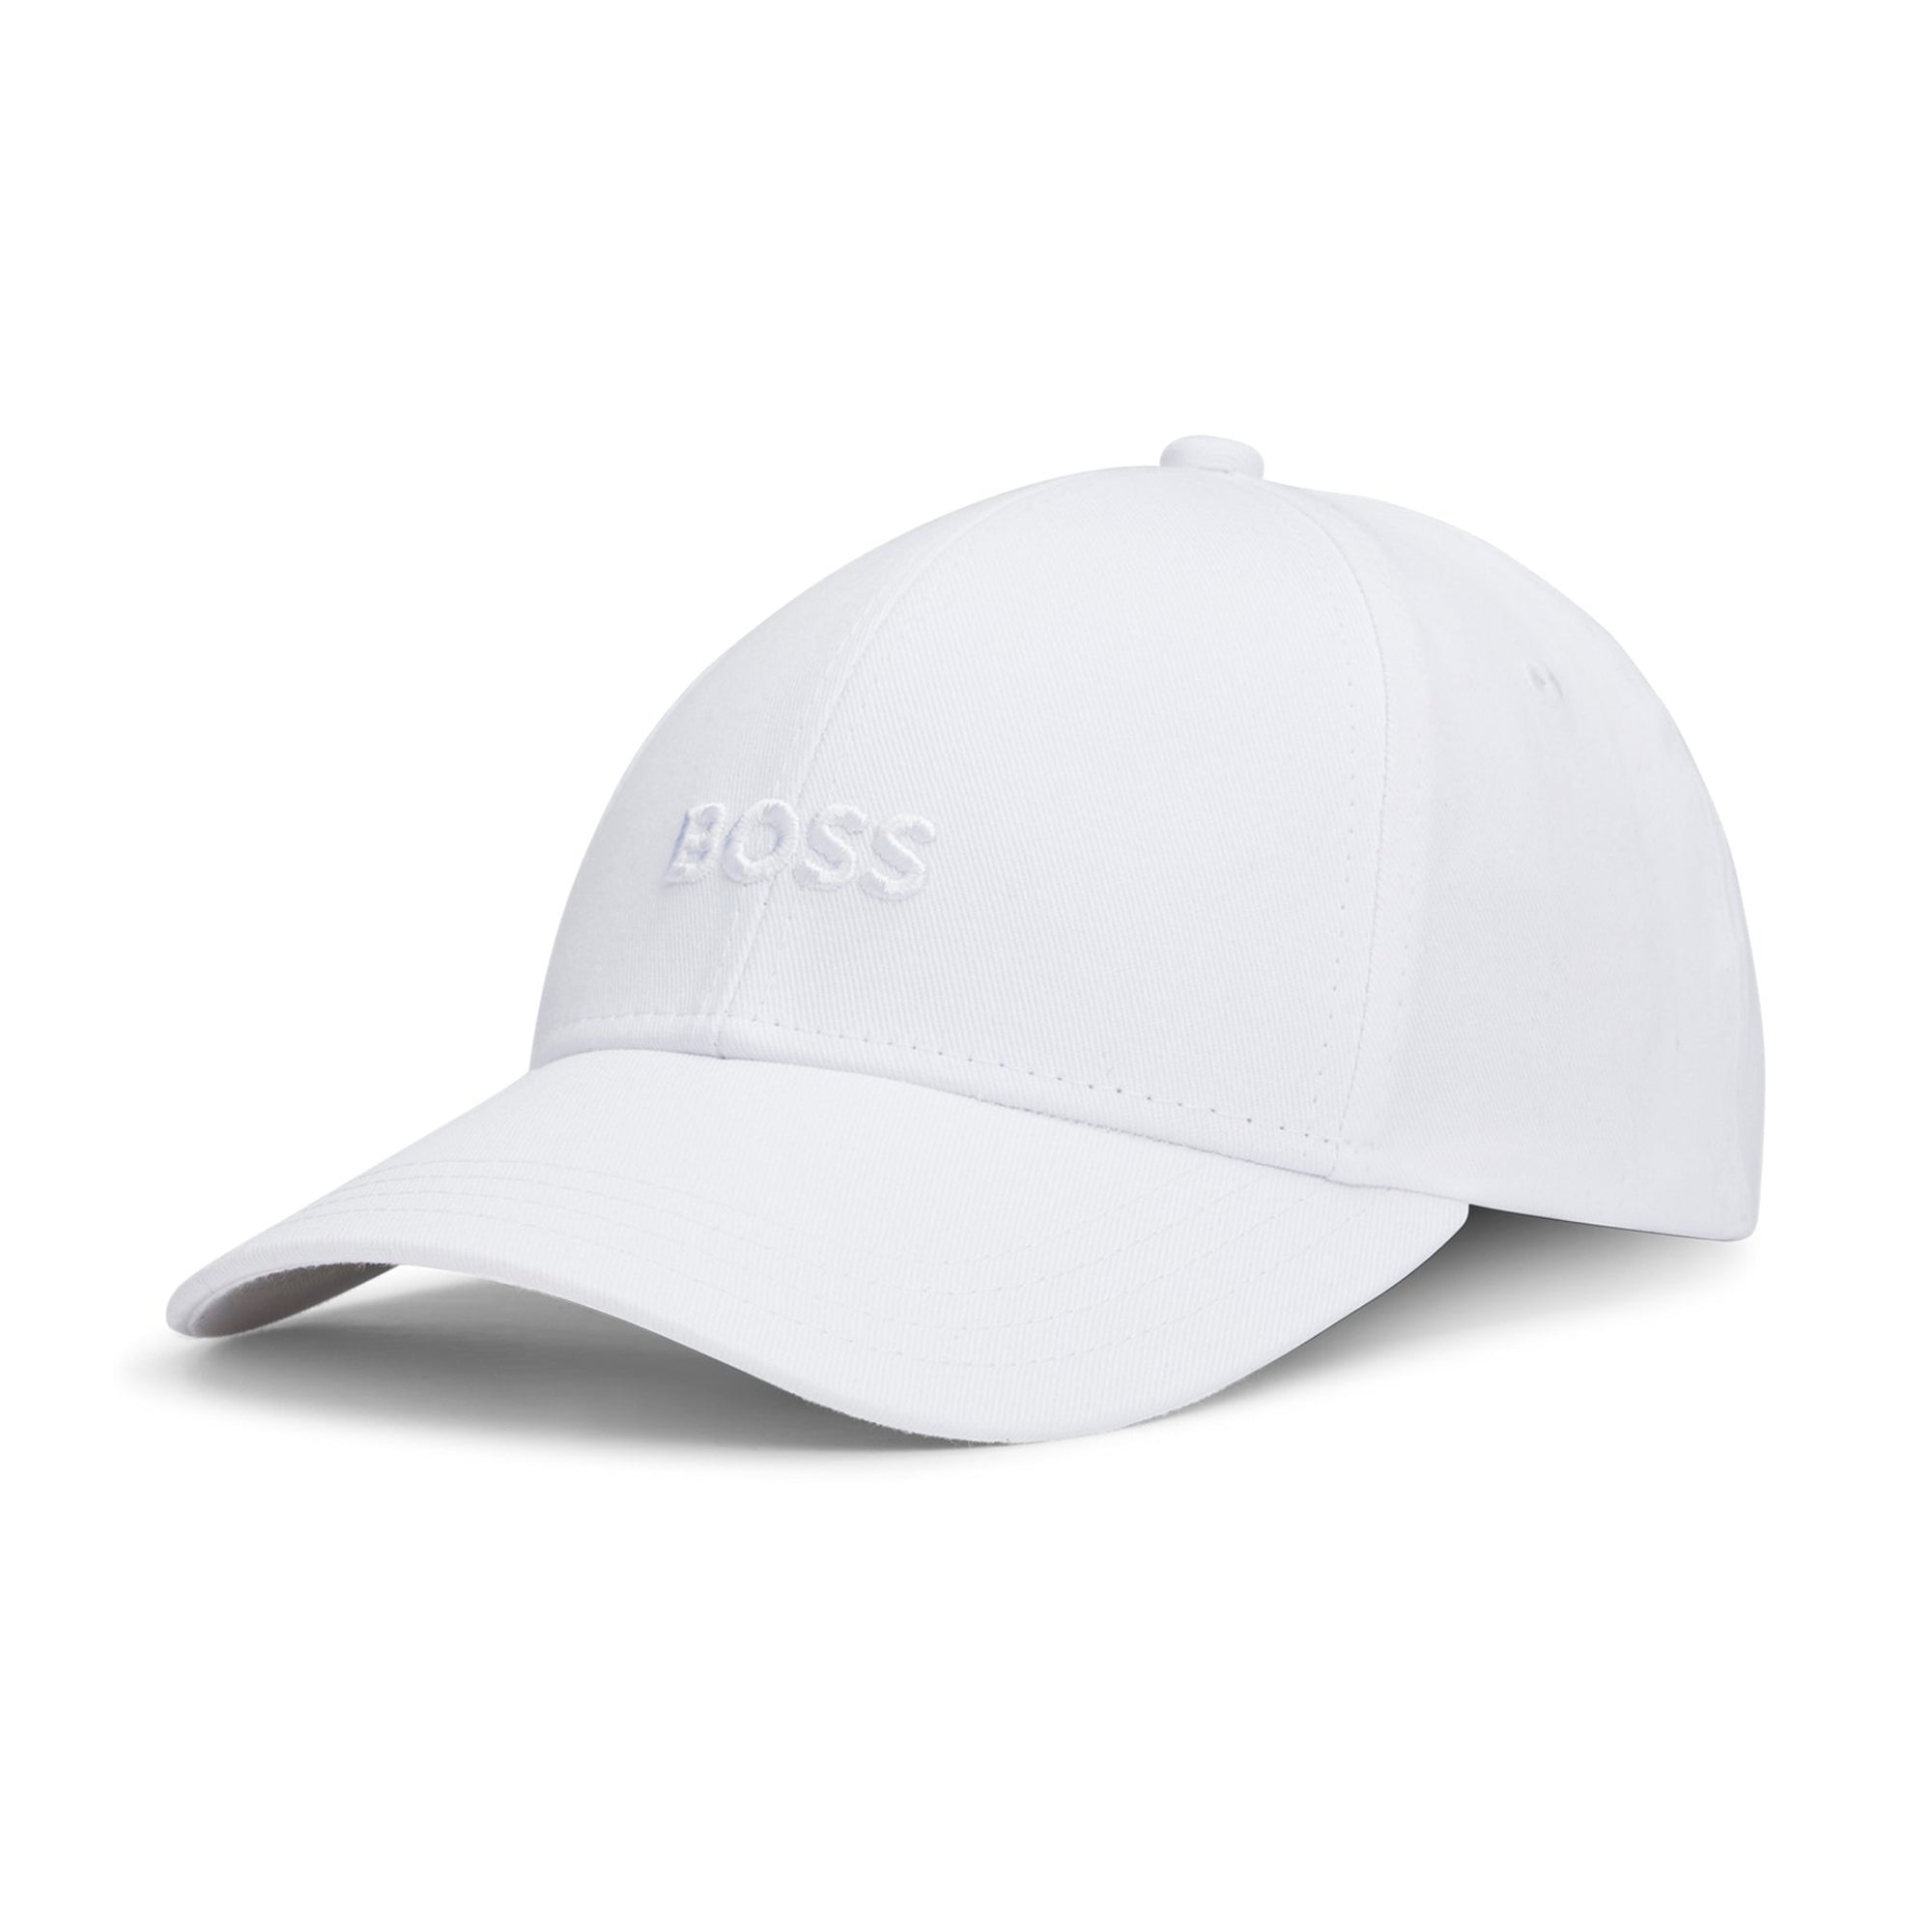 Boss Zed Embroidered Cotton Cap - White